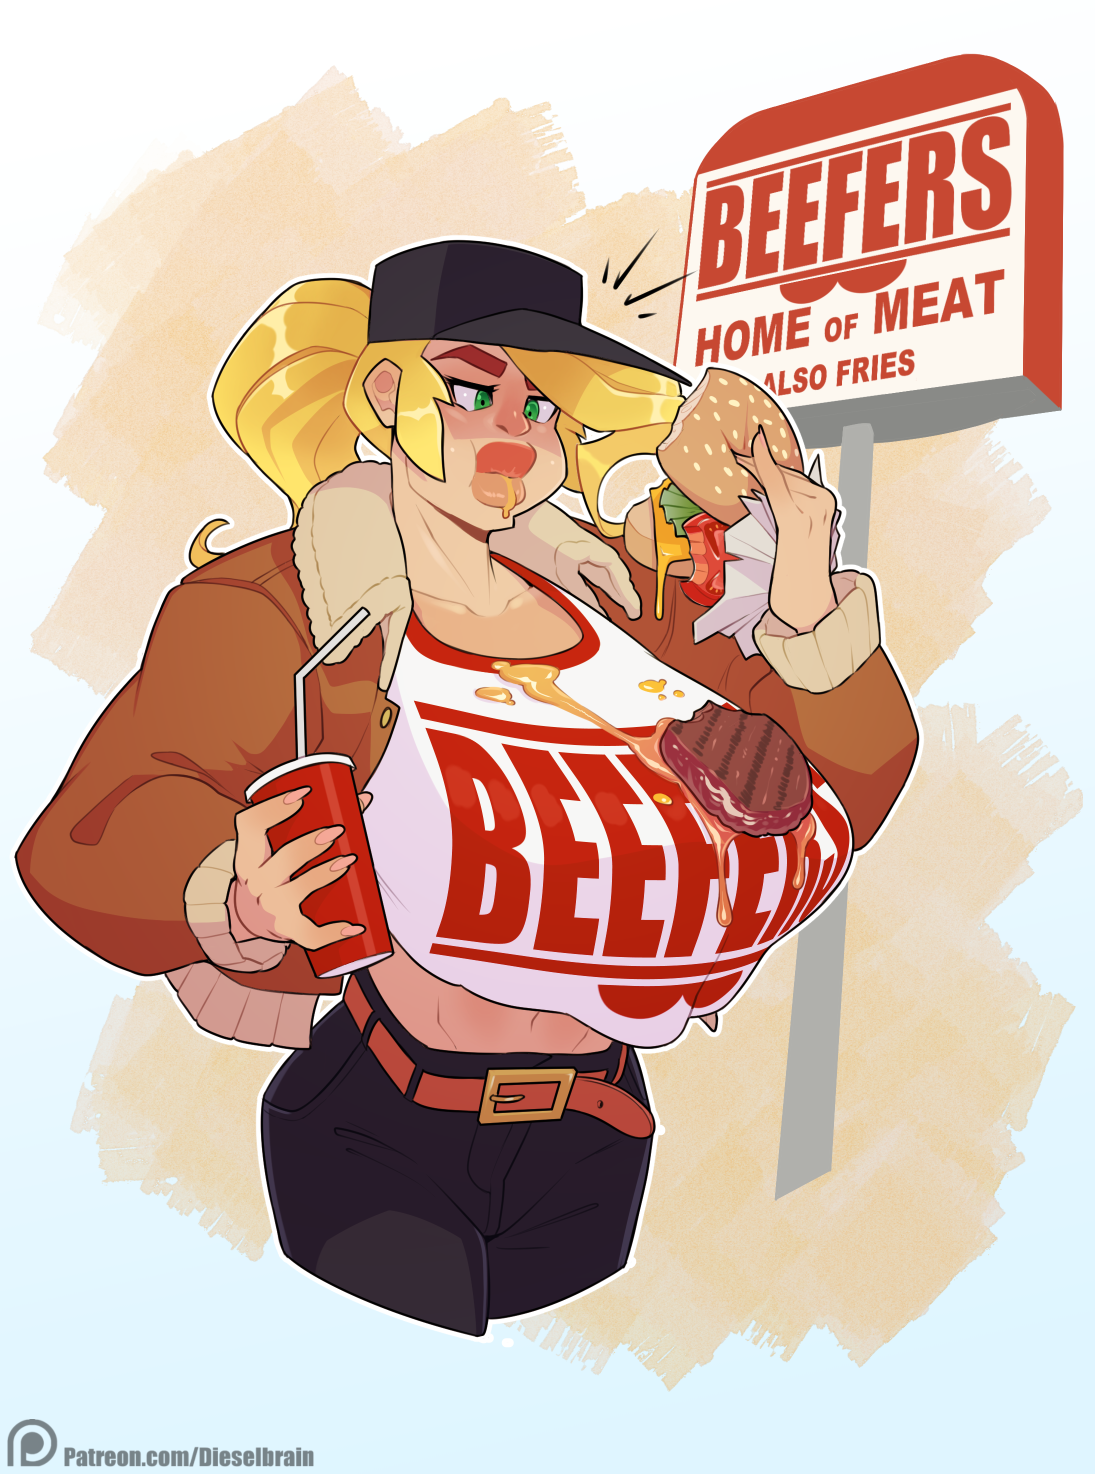 dieselbrain: ‘BEEFERS’ does not skimp on the condiments on their burgs, and the